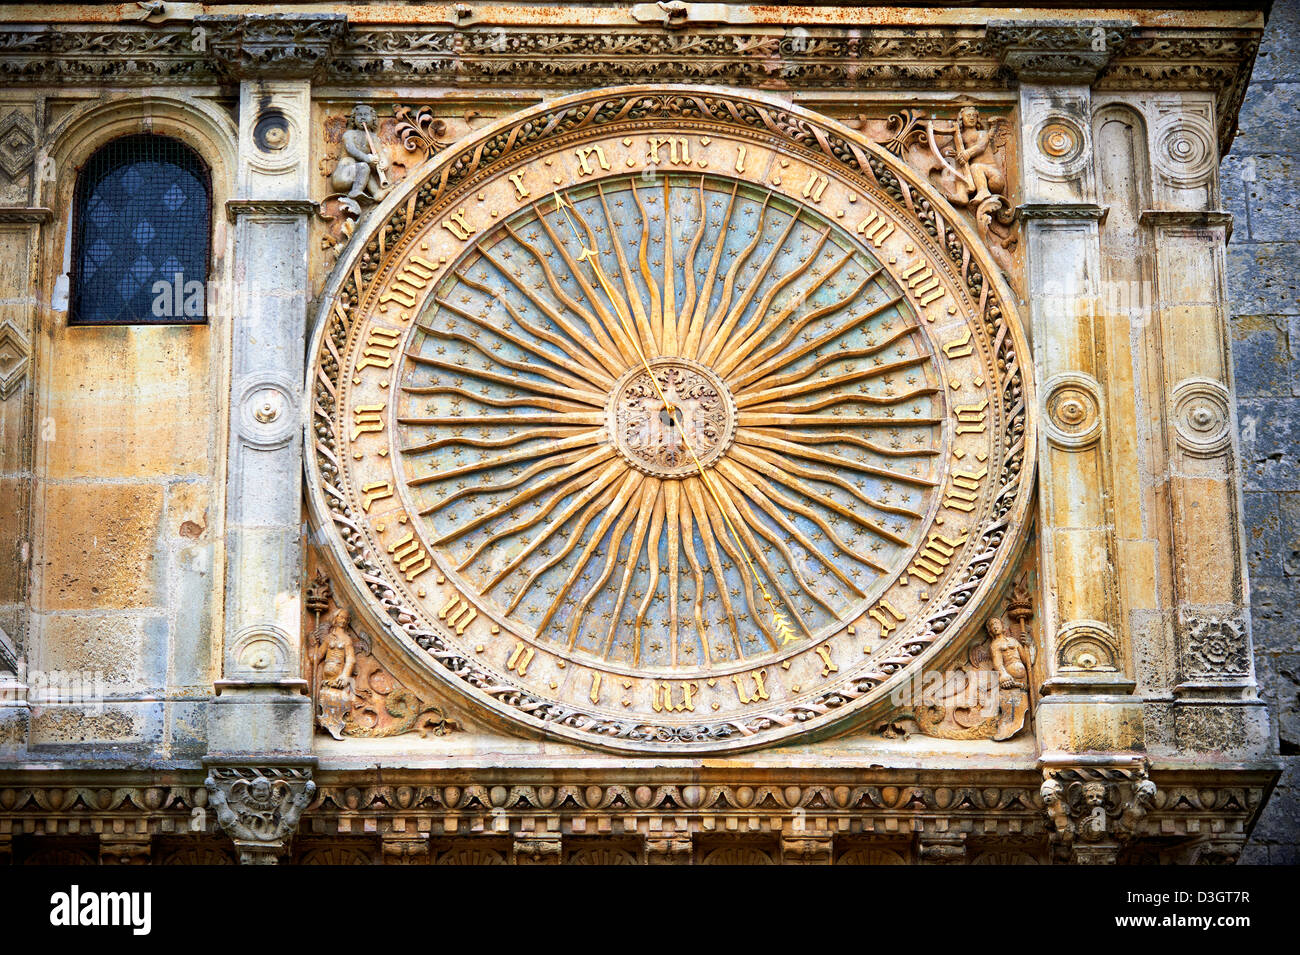 The astronomical clock (1528) of the Cathedral of Chartres, France. A UNESCO World Heritage Site. Stock Photo